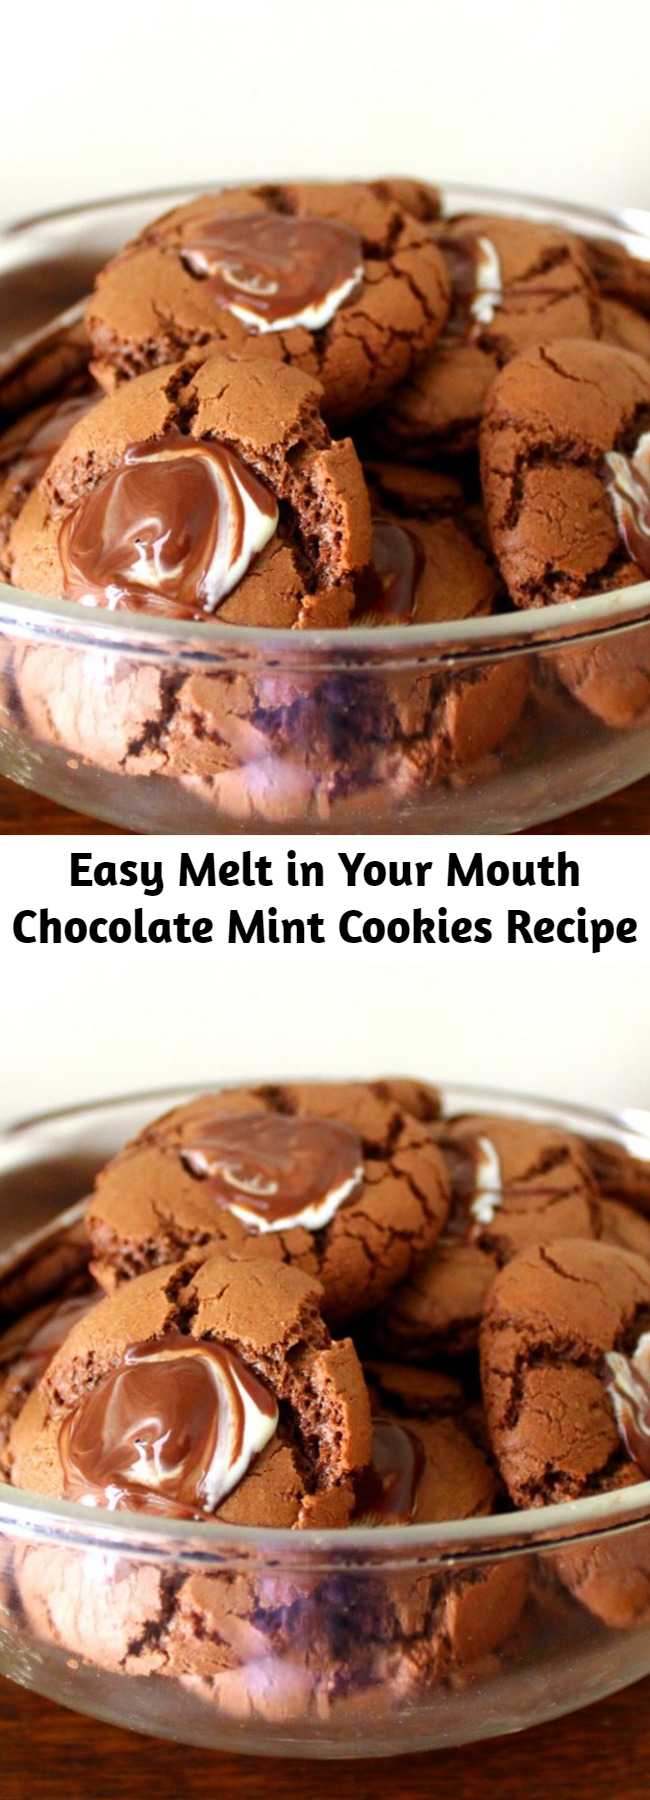 Easy Melt in Your Mouth Chocolate Mint Cookies Recipe - This is a melt in your mouth chocolate cookie that has a chocolate mint frosting. It's delicious and it's easy!